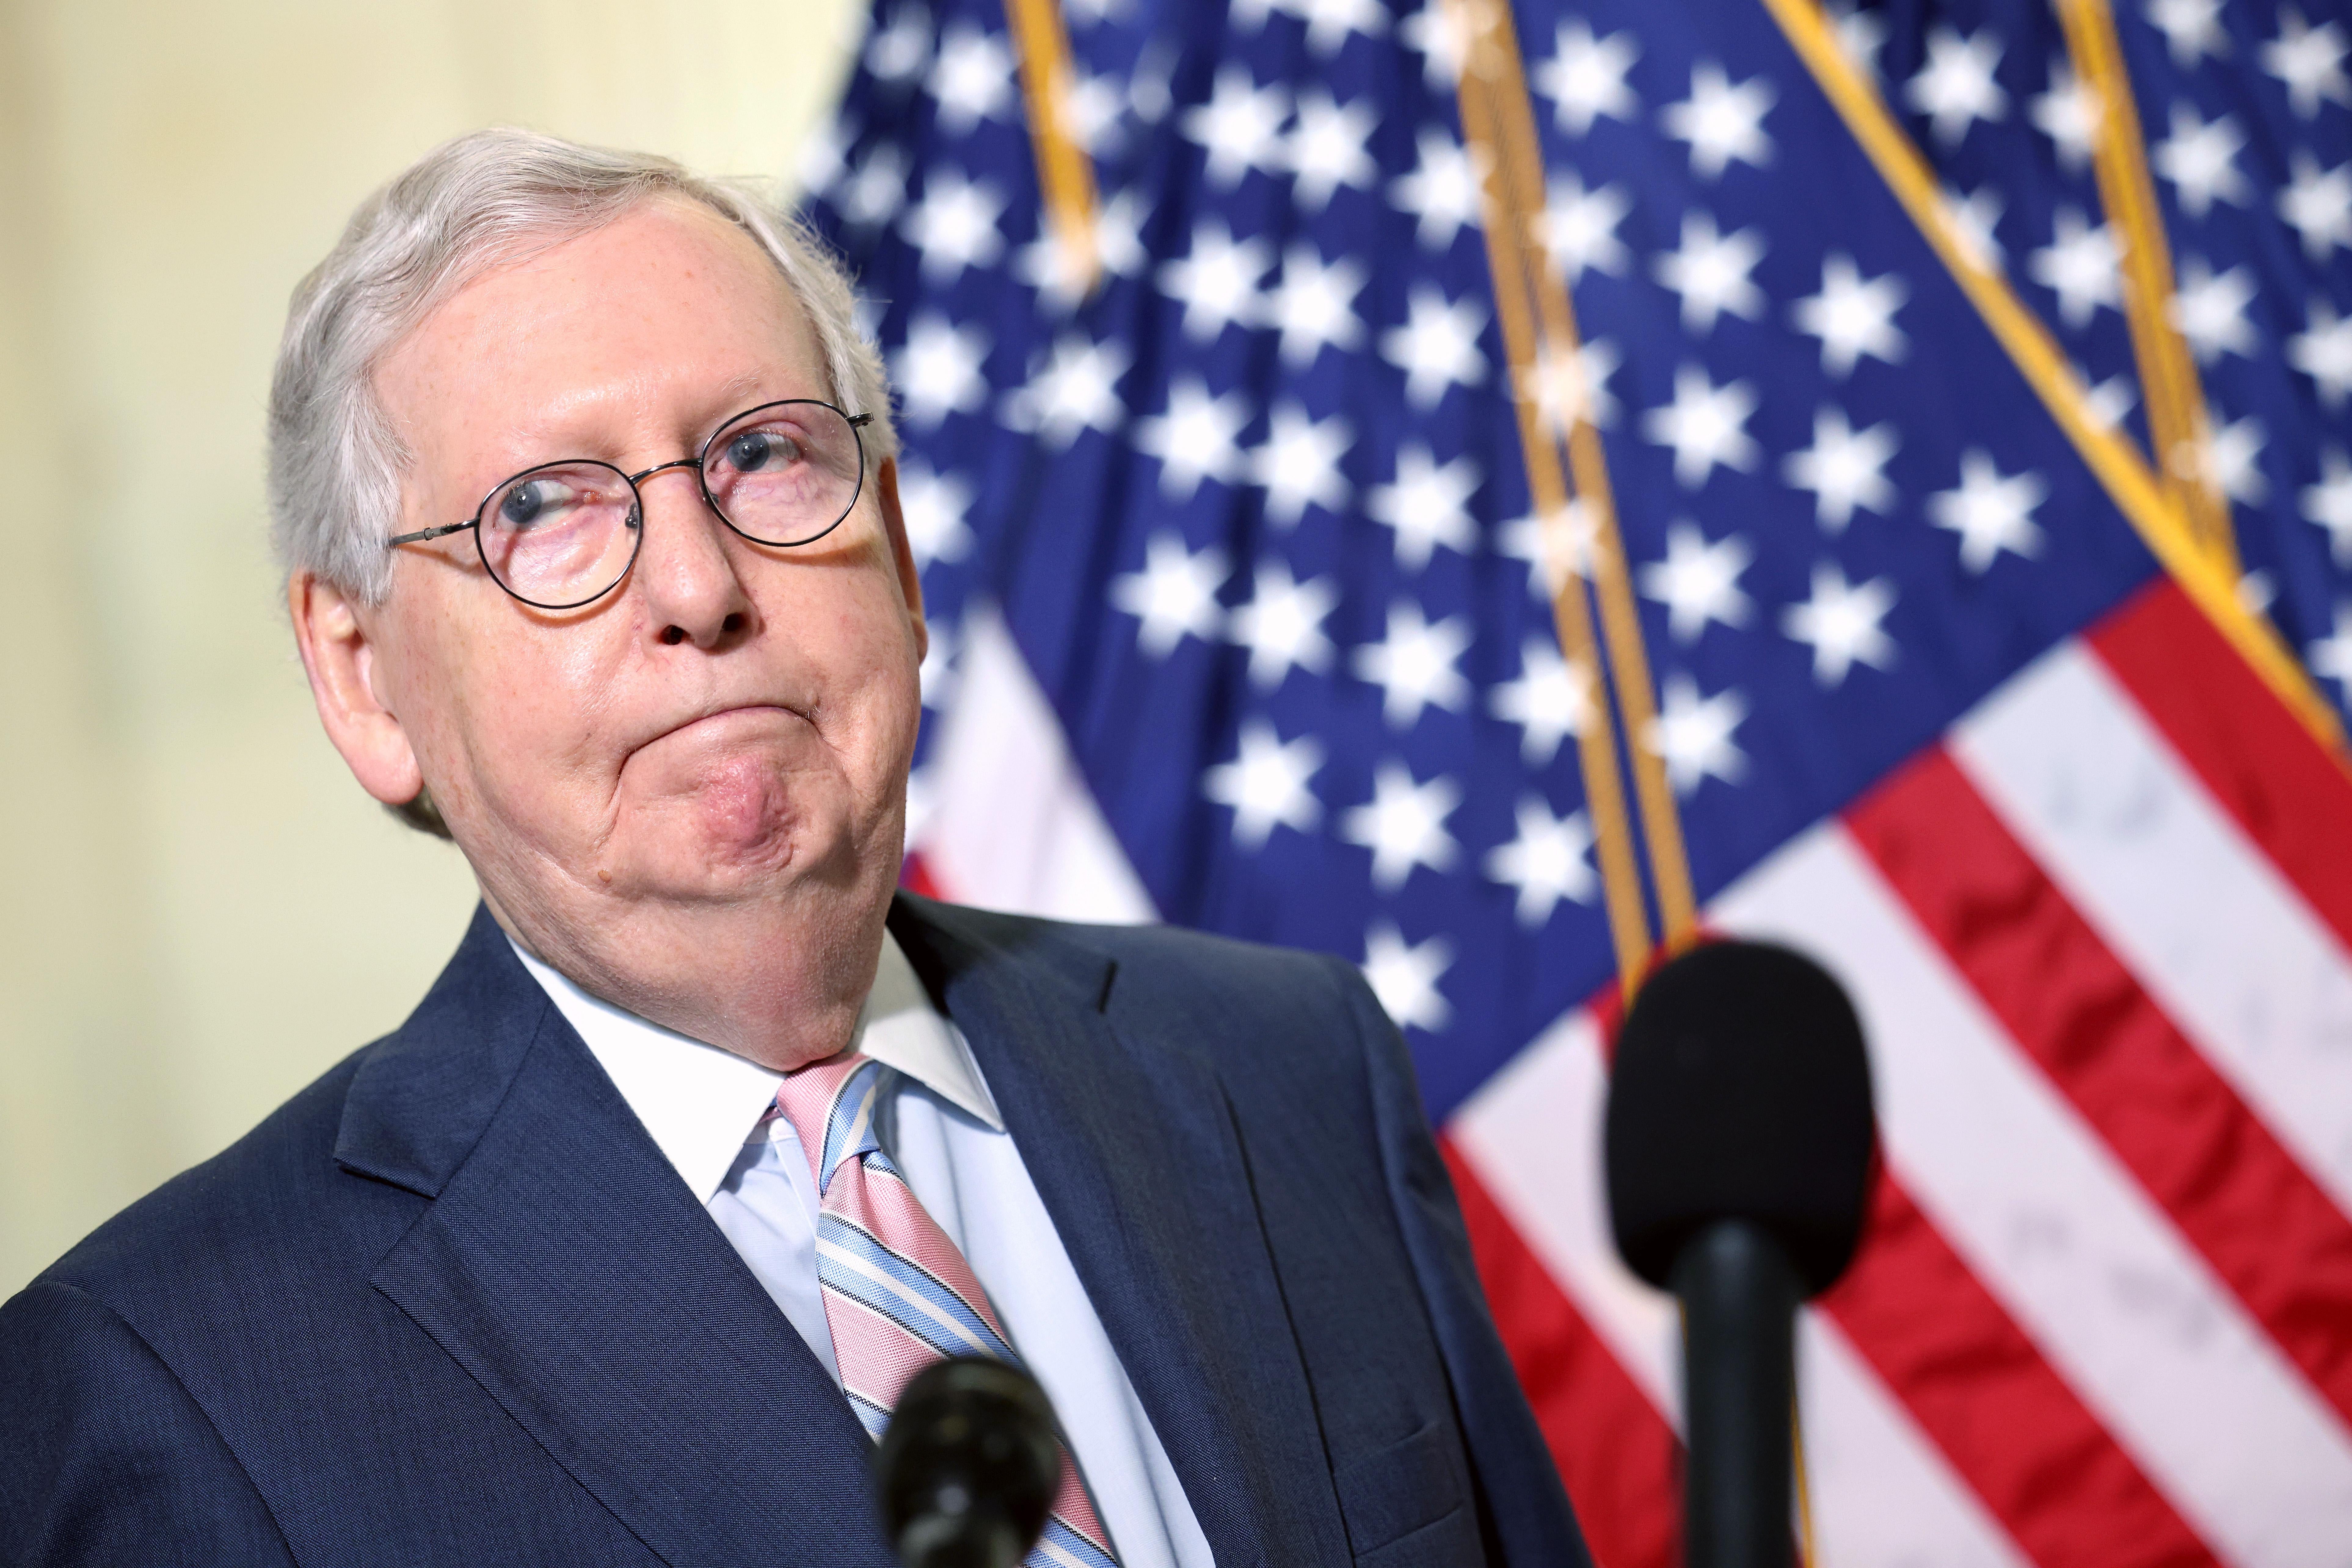 Senate Majority Leader Mitch McConnell frowning in front of a microphone and an American flag.